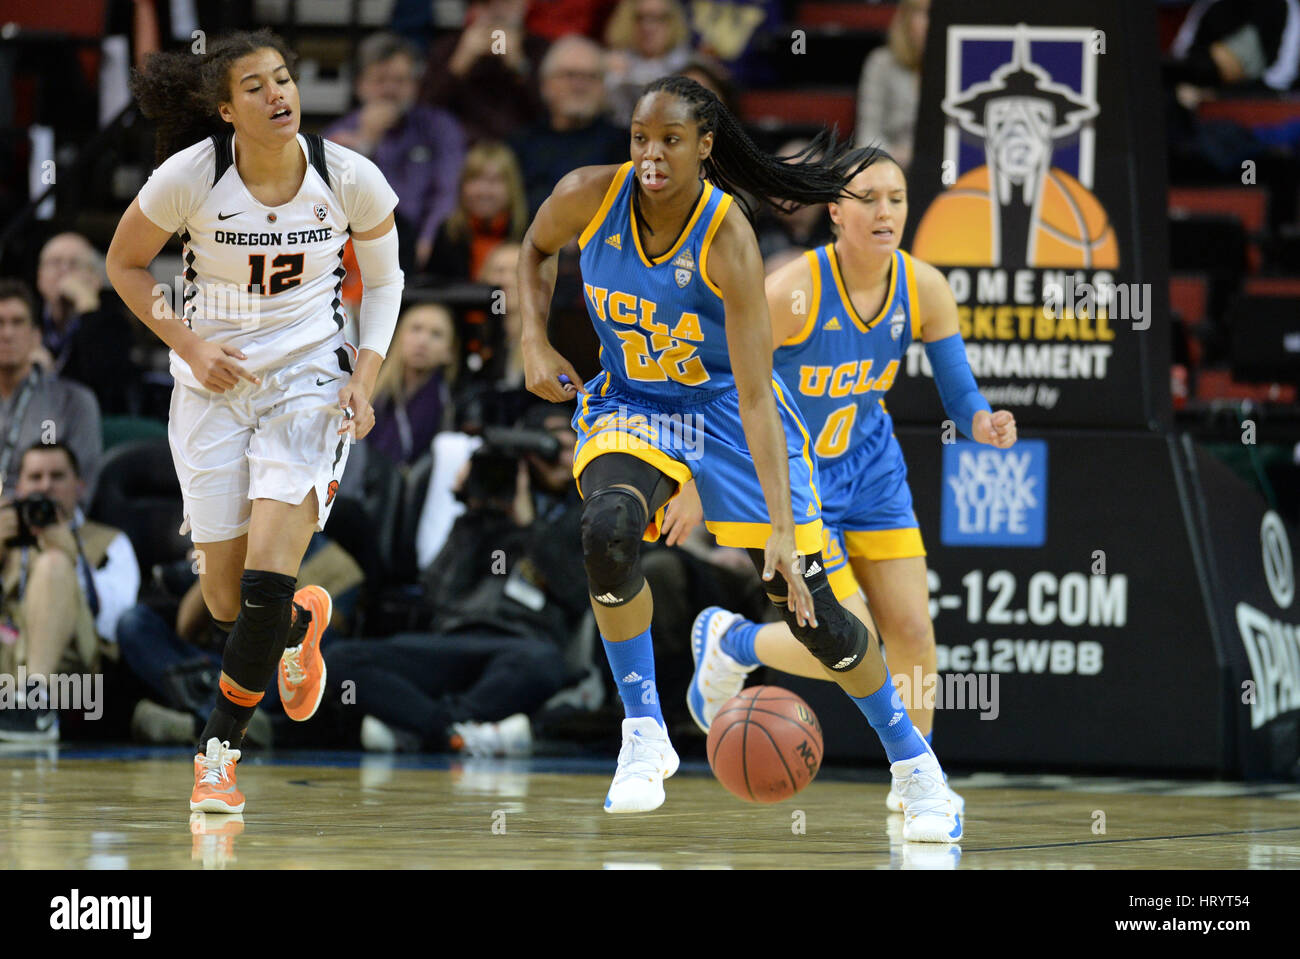 Seattle, WA, USA. 4th Mar, 2017. UCLA's Kennedy Burke (22) leads the fast break during a PAC12 women's tournament semi-final game between the Oregon State Beavers and the UCLA Bruins. The game was played at Key Arena in Seattle, WA. Jeff Halstead/CSM/Alamy Live News Stock Photo